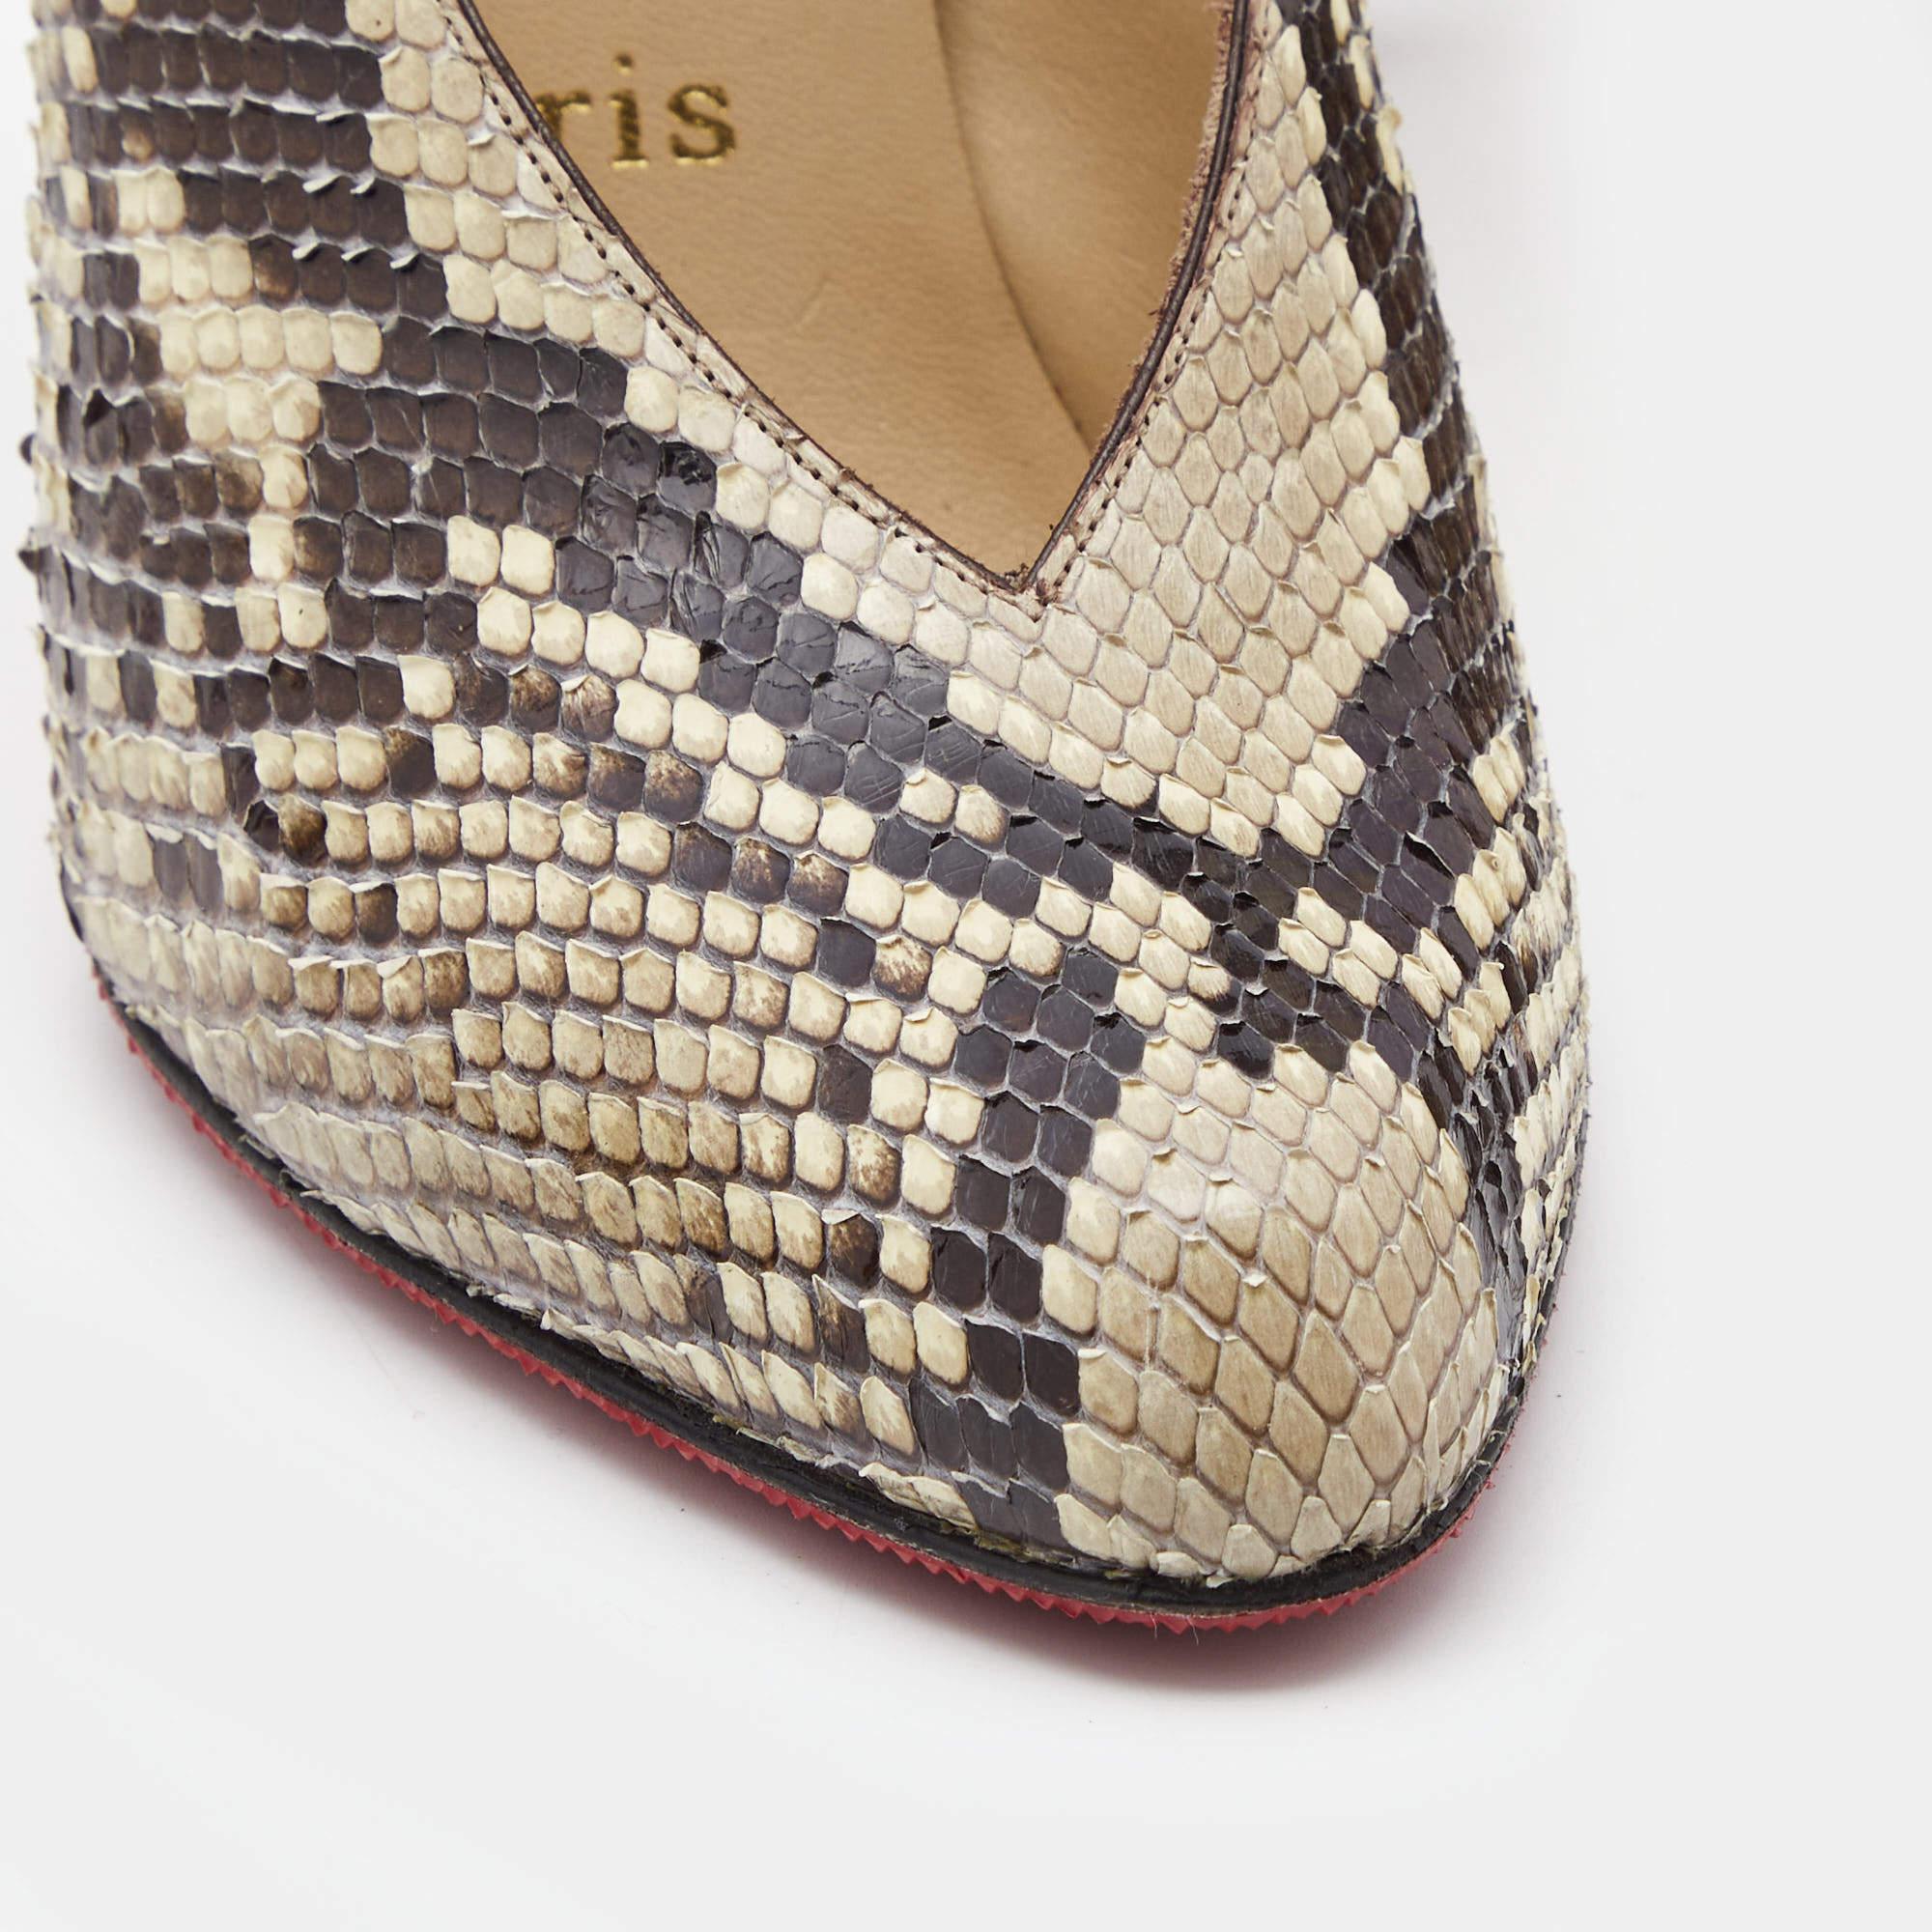 Christian Louboutin Beige/Brown Python Pumps Size 38.5 For Sale 1